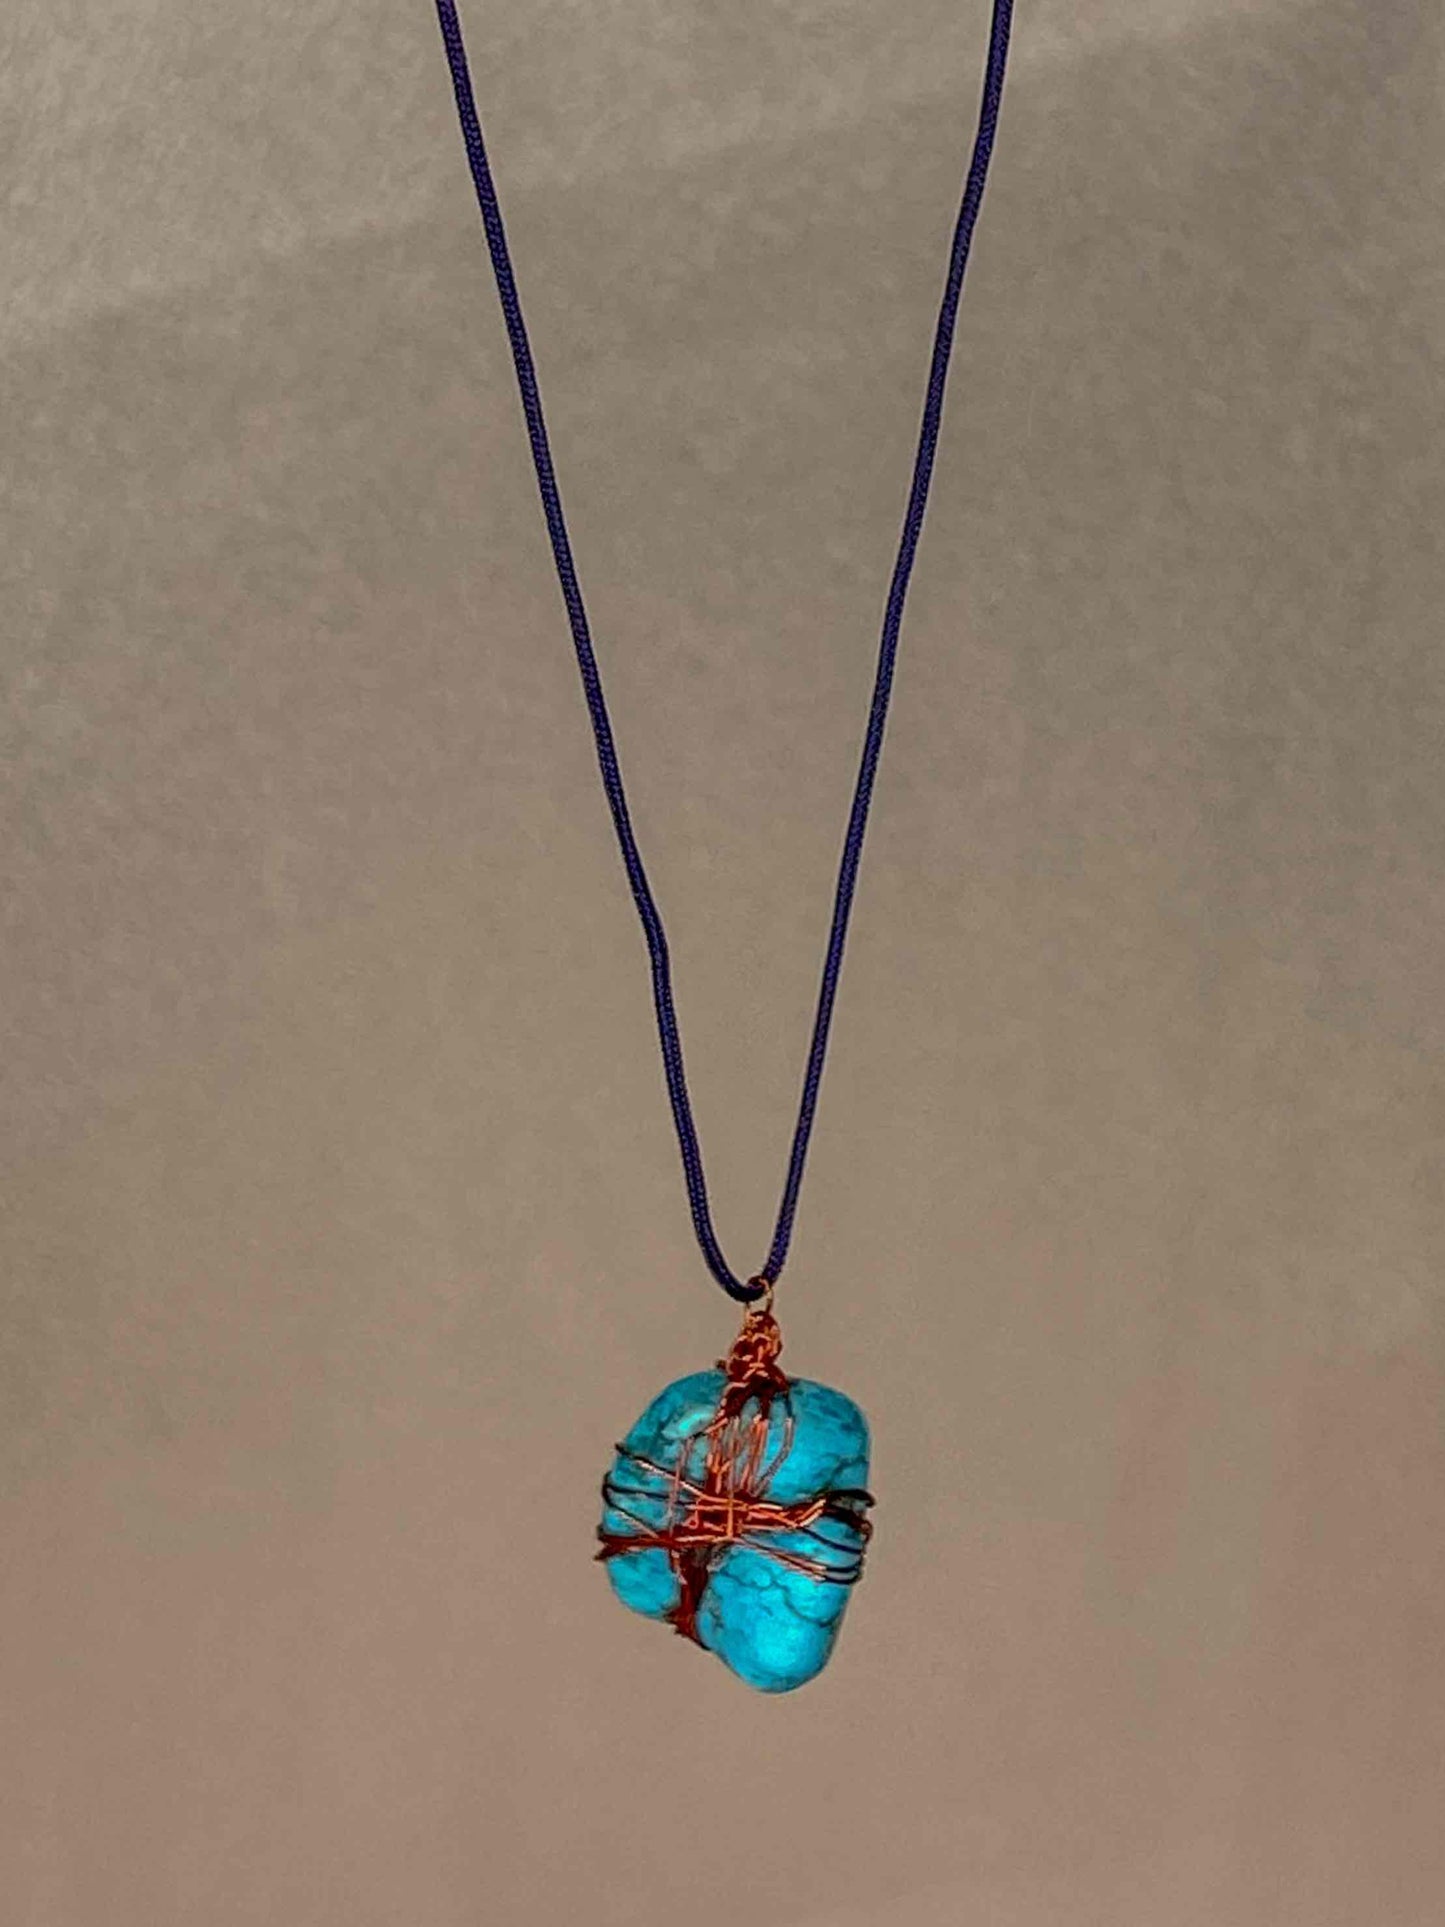 A handcrafted wire-wrapped turquoise stone pendant necklace.